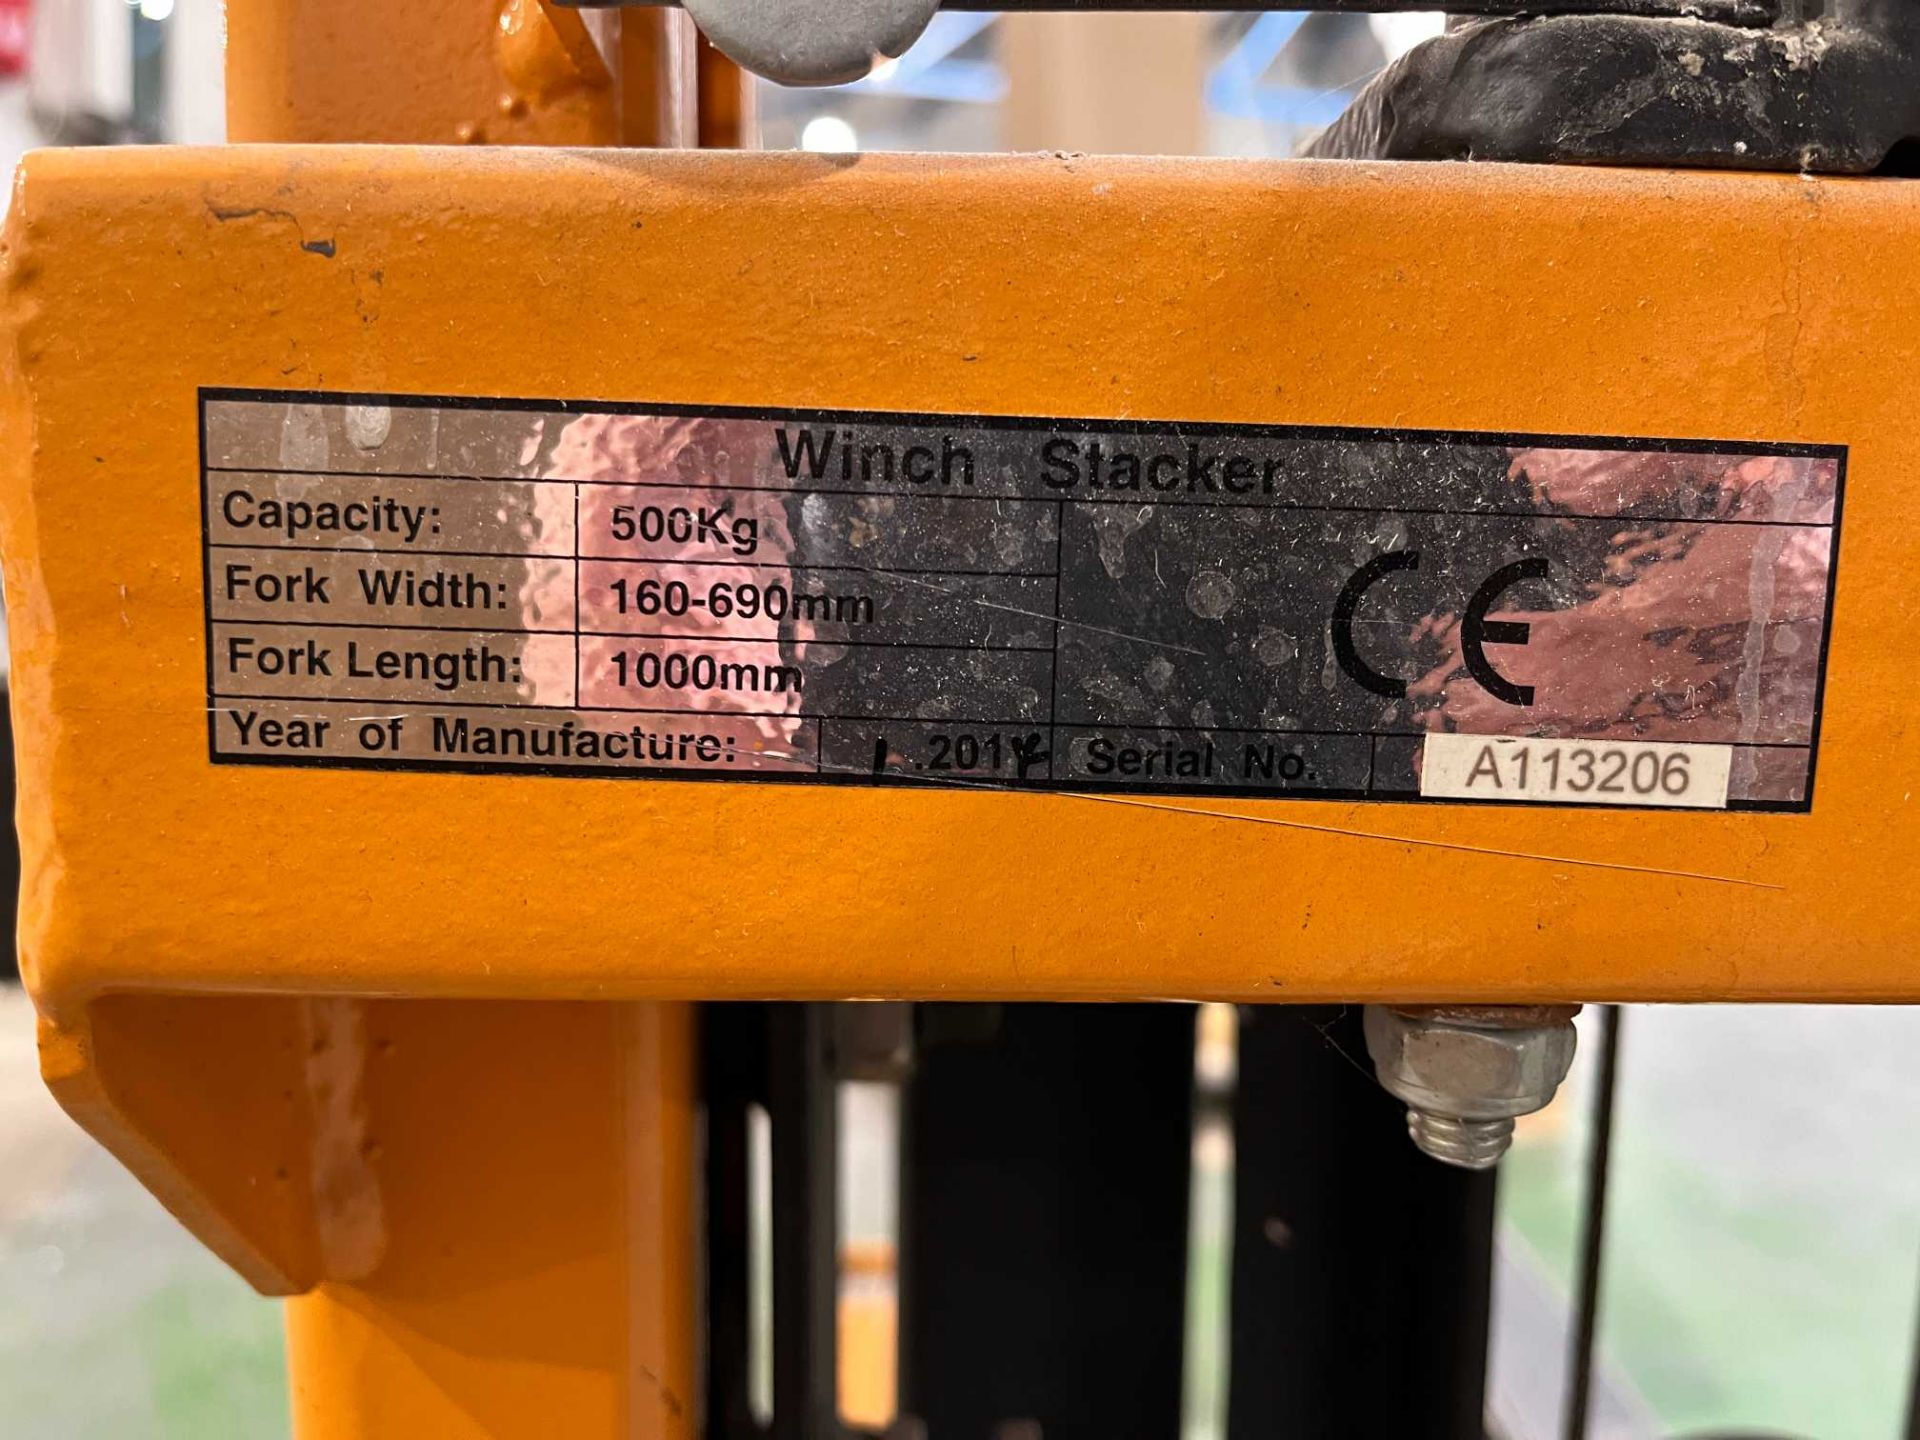 Durolift winch stacker; Serial No: A113206 (2014) - Image 2 of 4